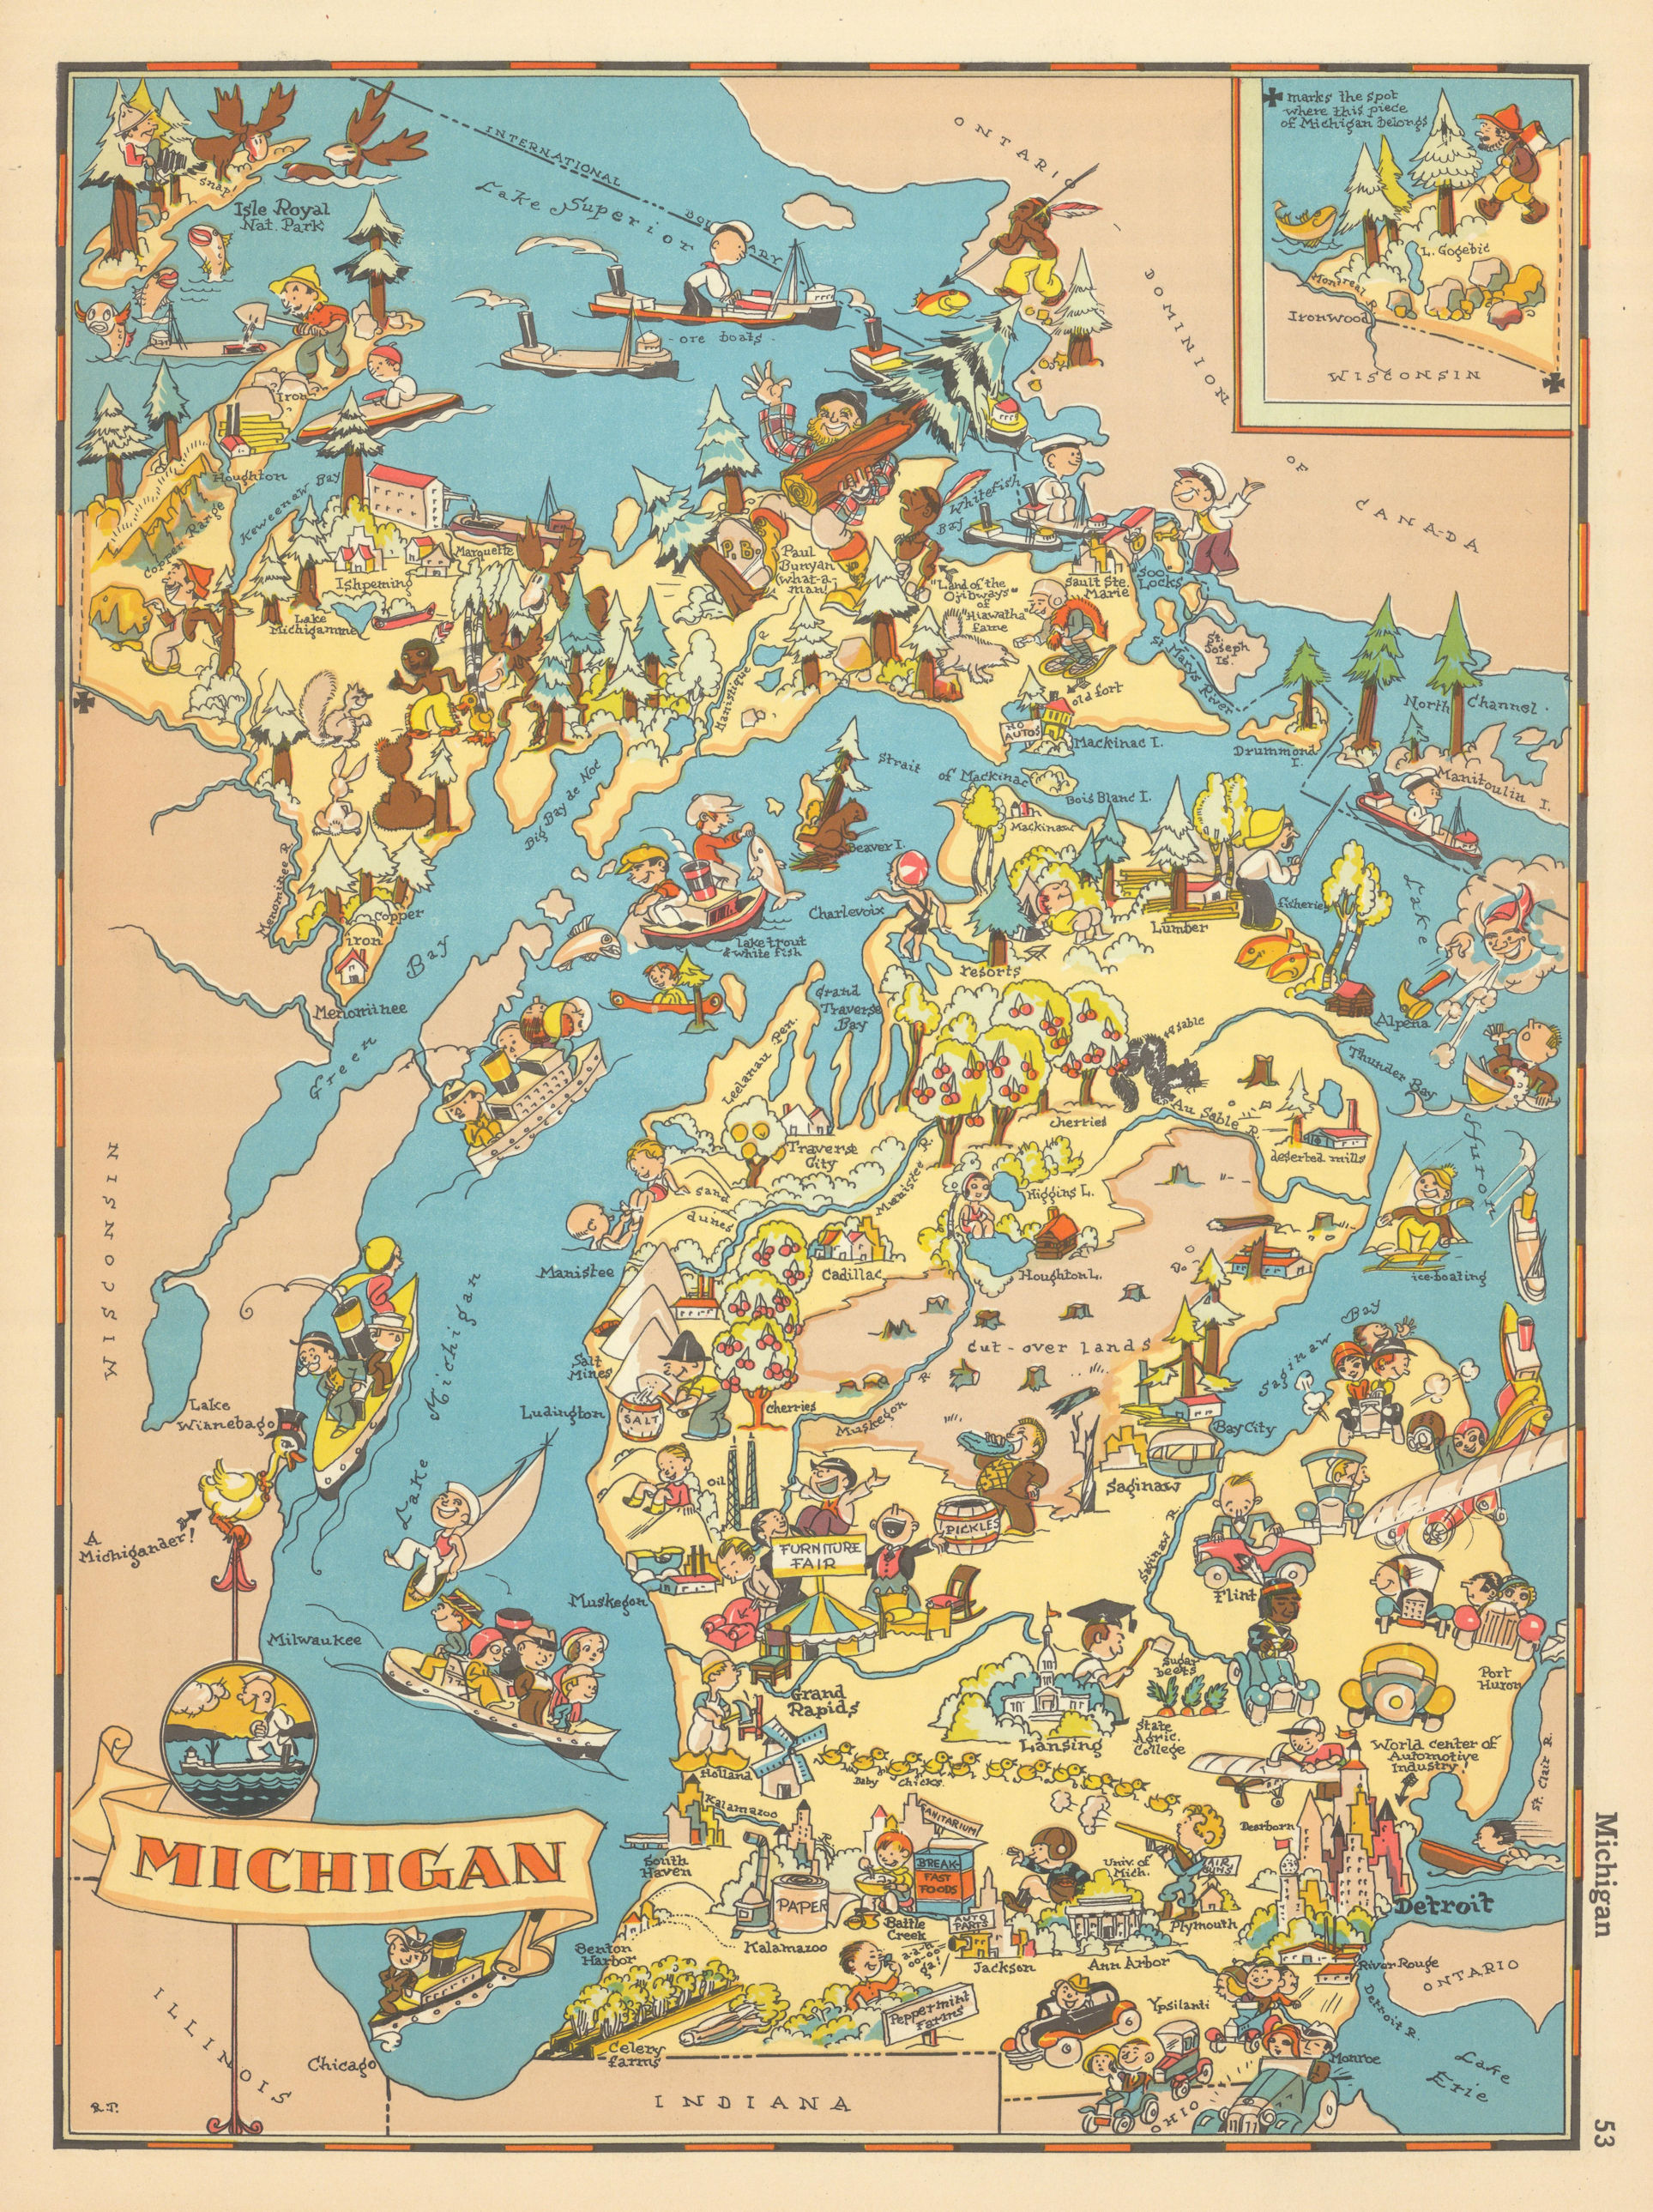 Associate Product Michigan. Pictorial state map by Ruth Taylor White 1935 old vintage chart